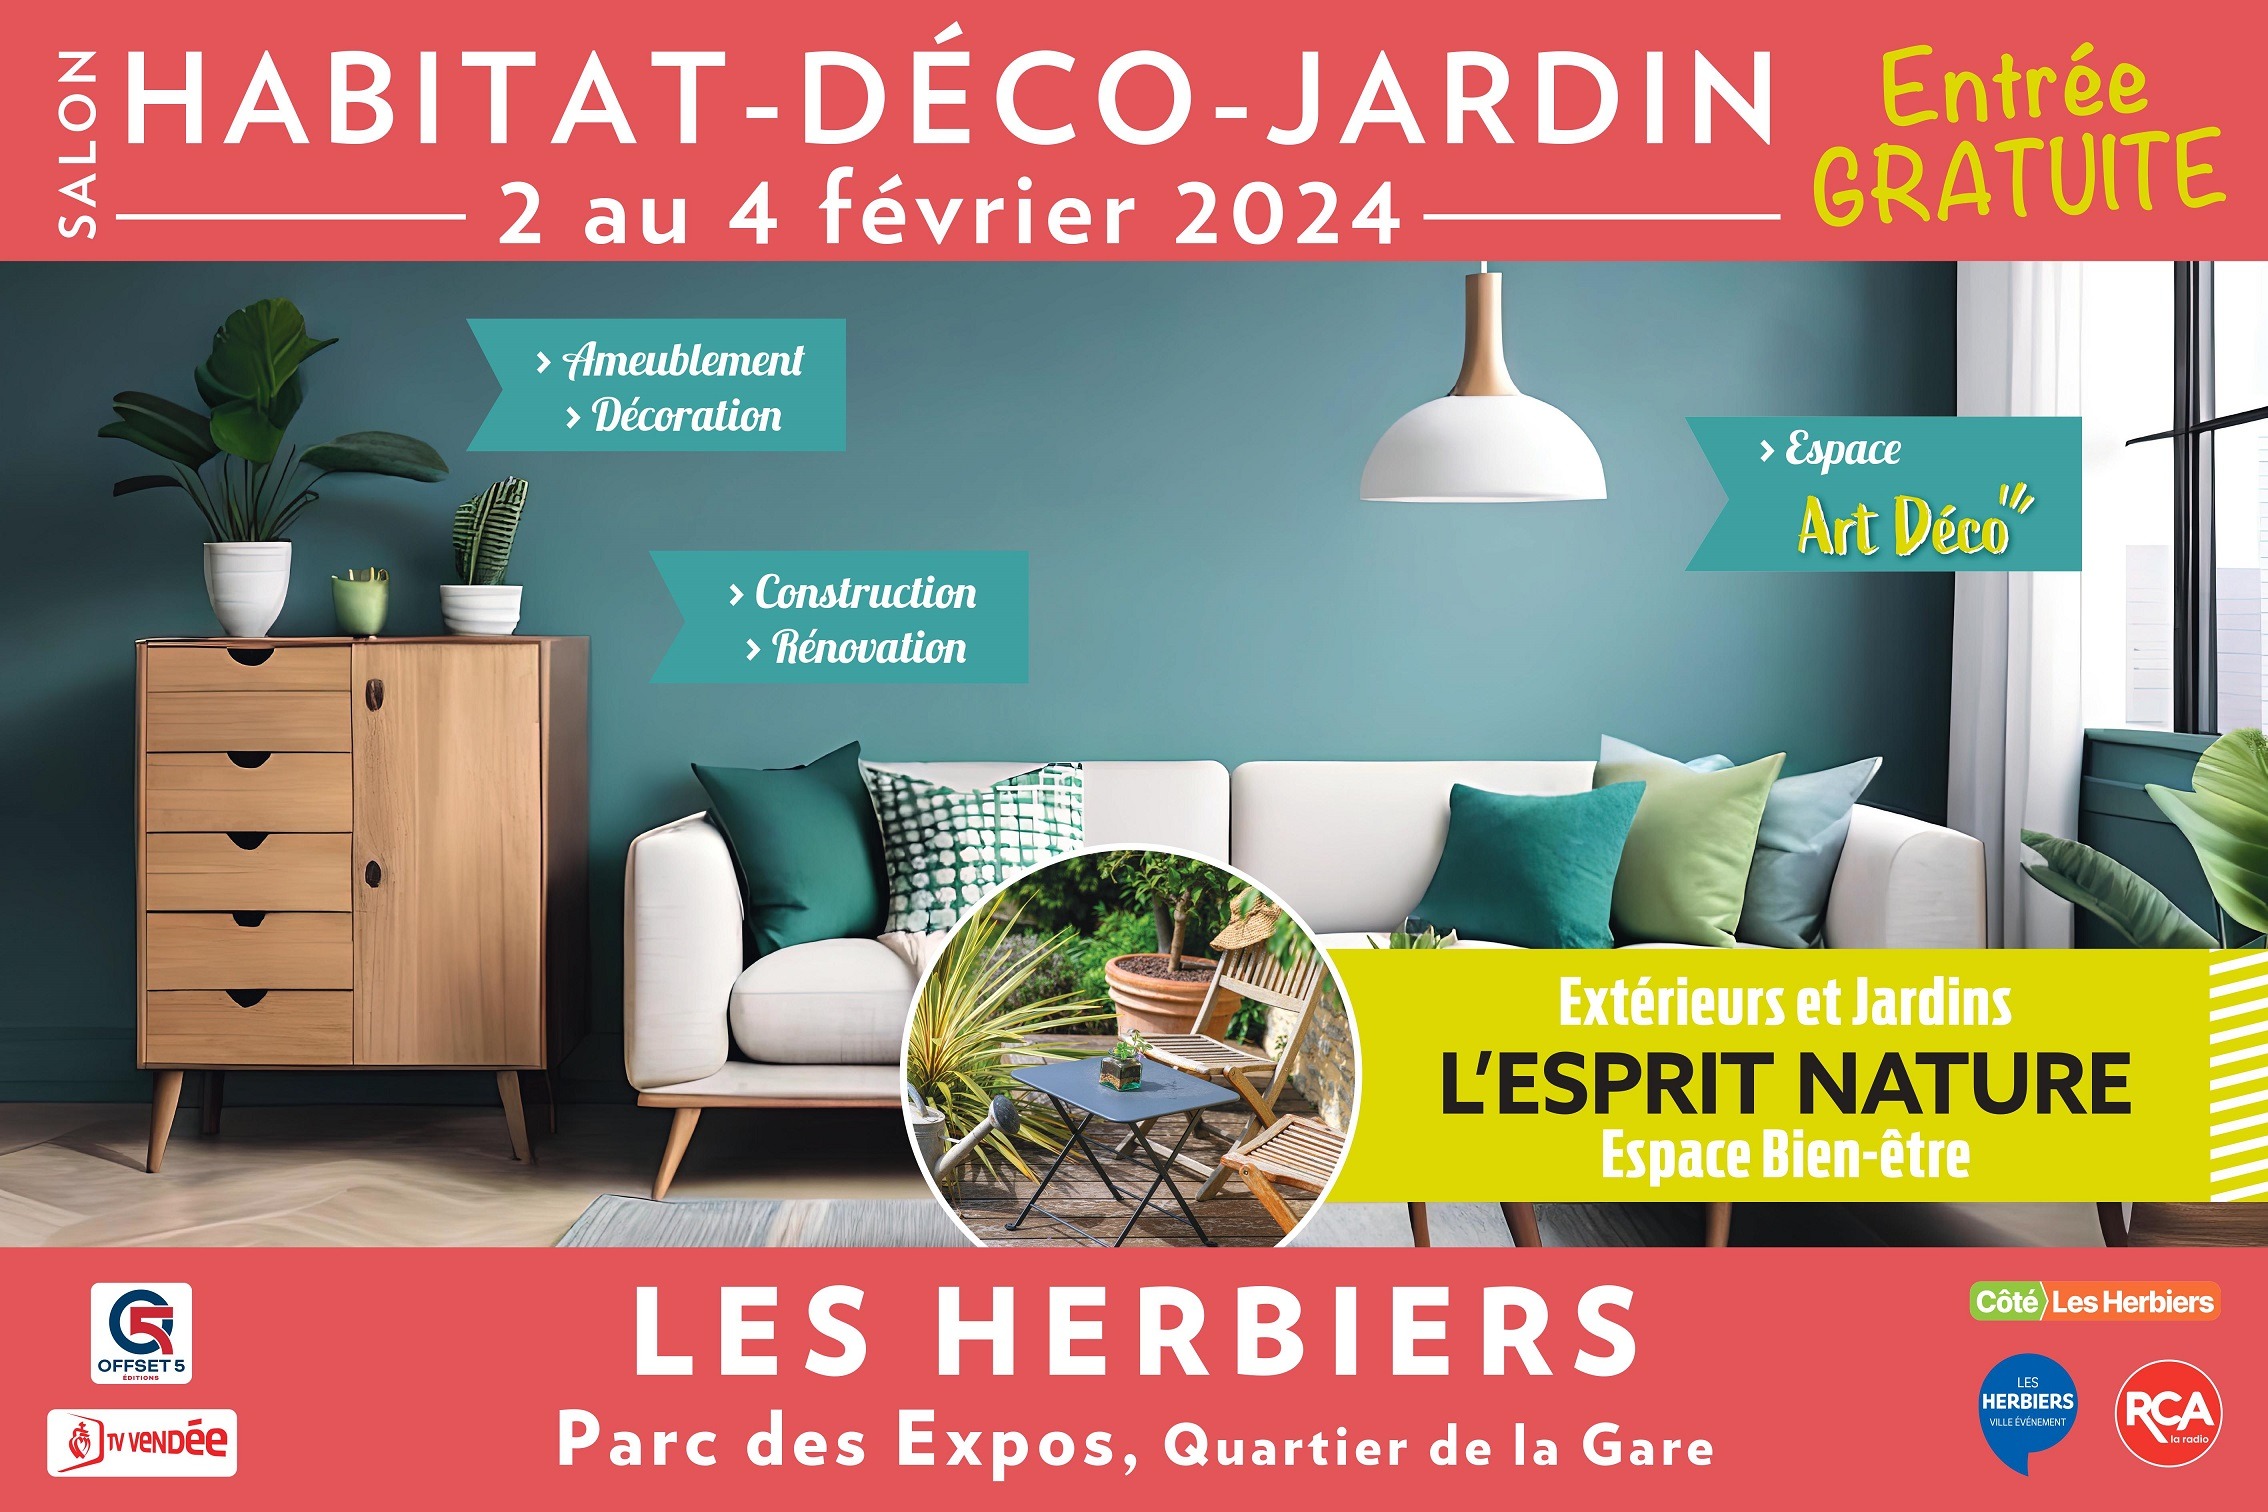 You are currently viewing Salon des Herbiers – 2 au 4 février 2024